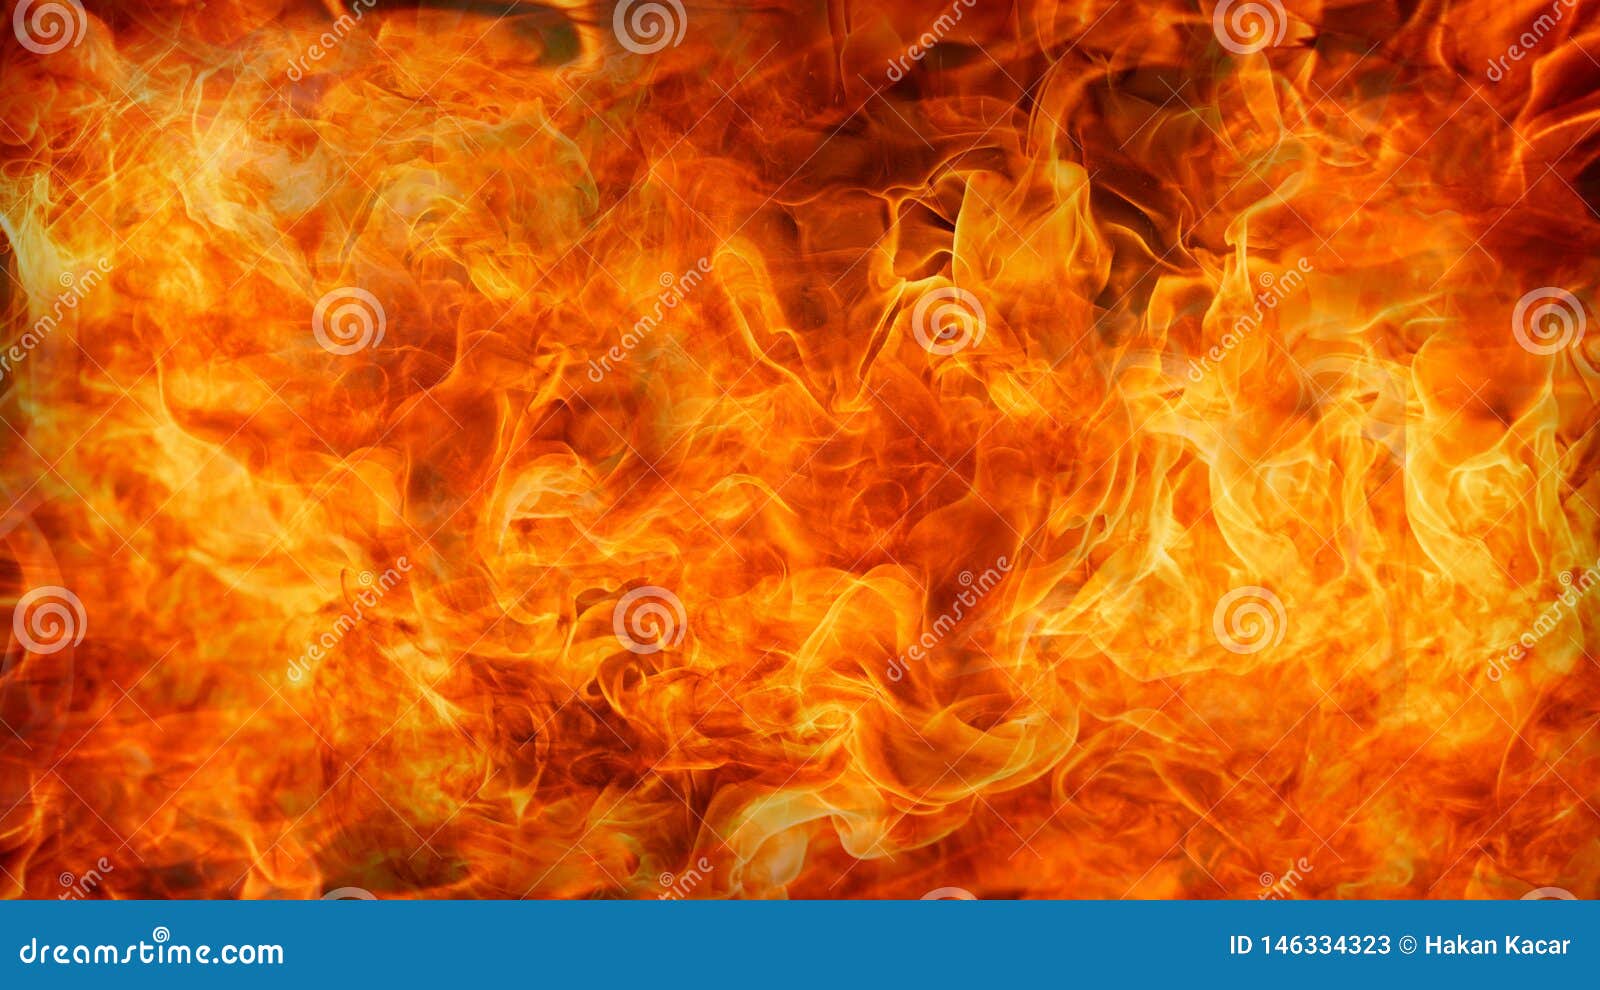 Fire and Flames with a Burning Dark Red-orange Background. Fire and Flames  Stock Image - Image of colors, island: 146334323